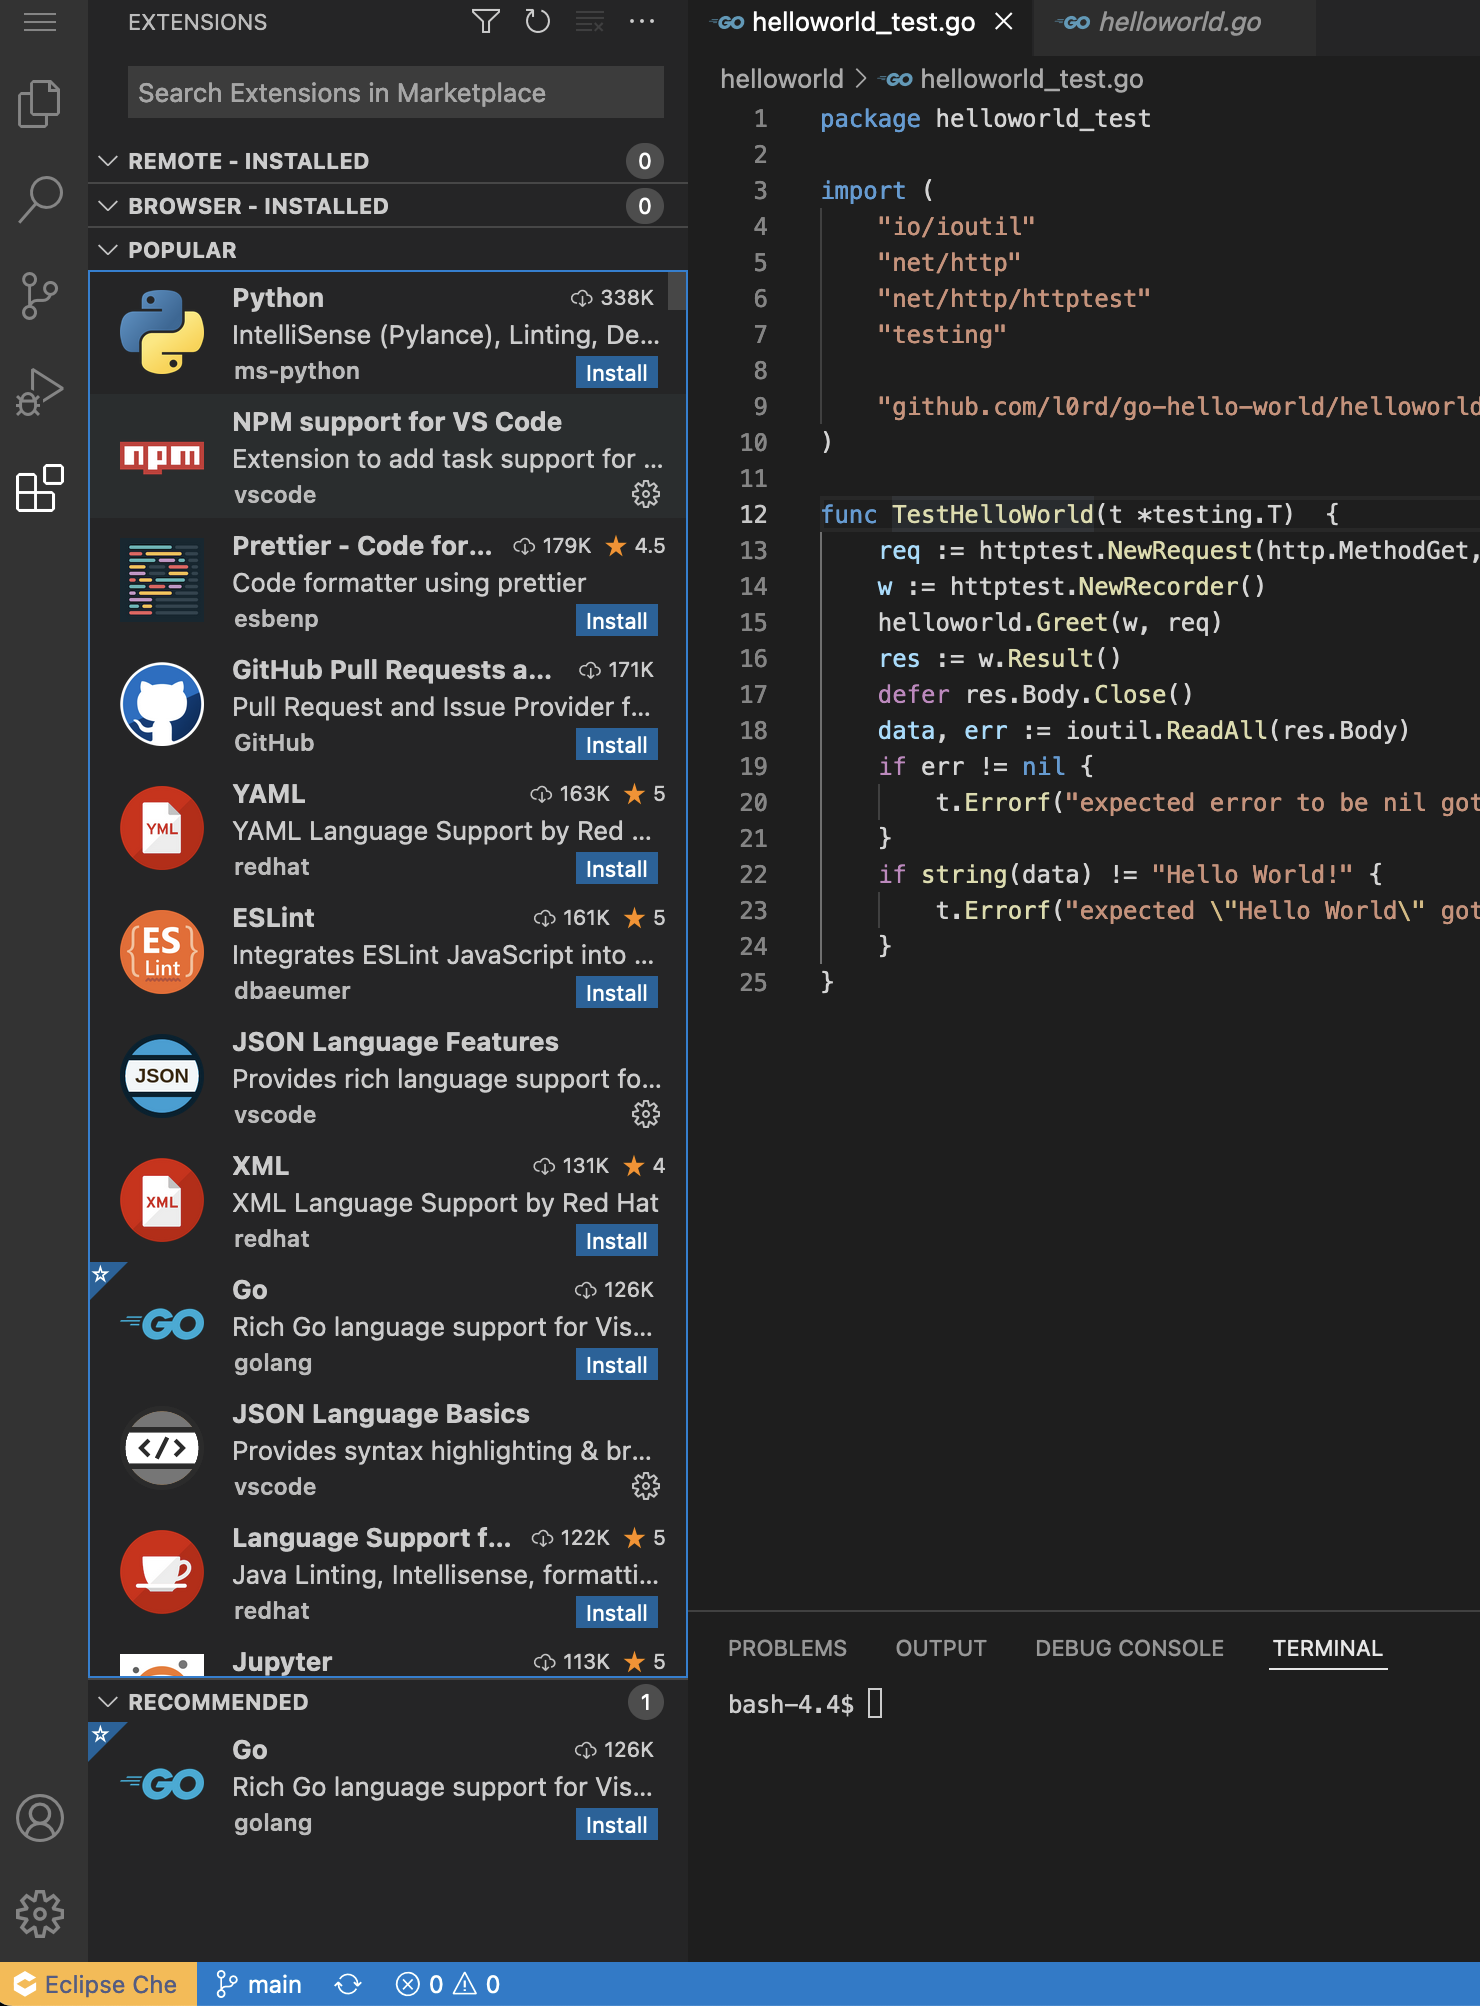 VS Code Extension view